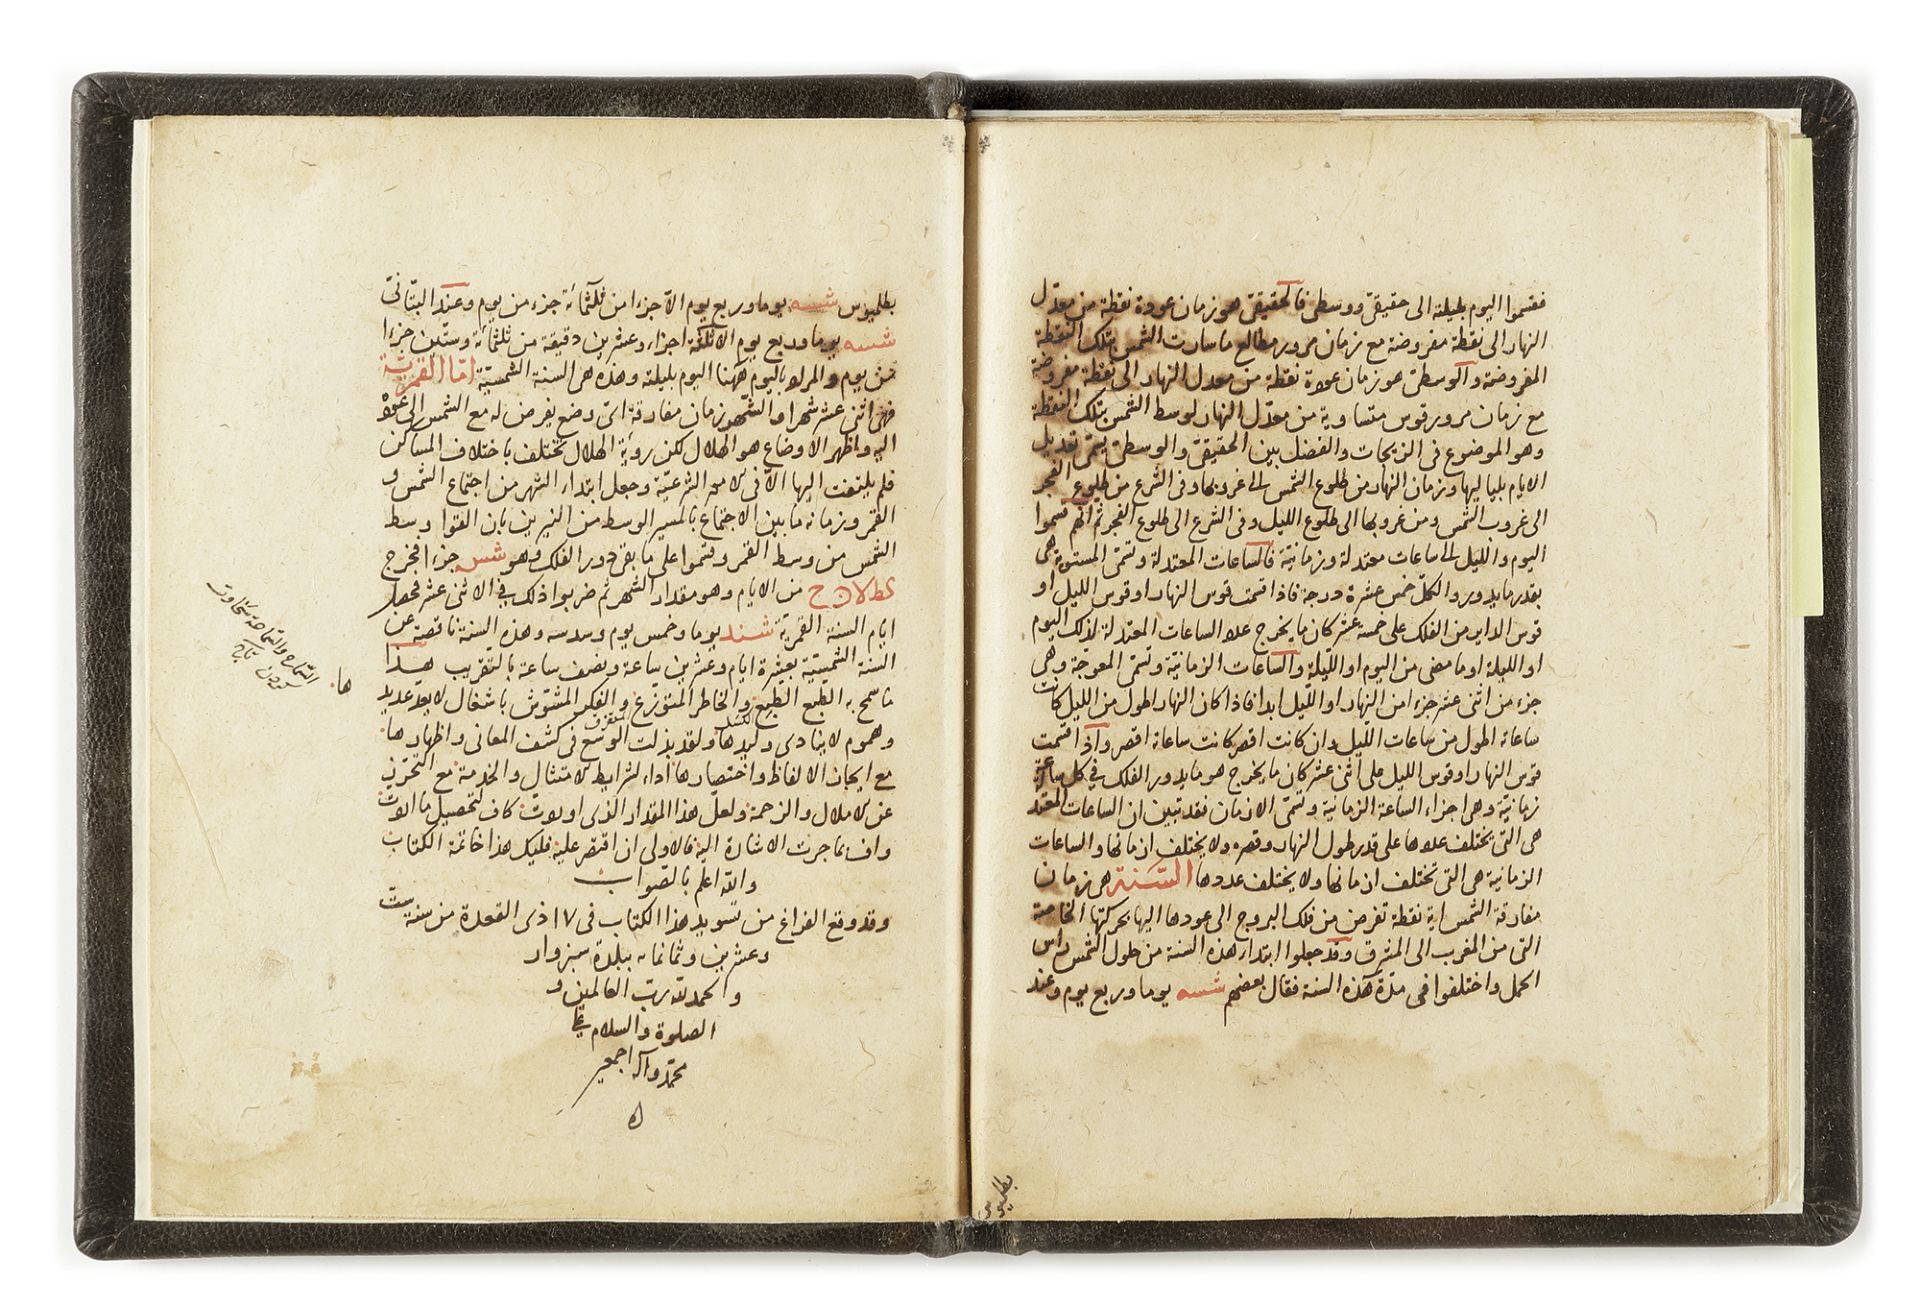 AN ILLUSTRATED ASTRONOMICAL TREATISE BY AL-JAGHMINI, COPIED BY MIRZA MUHAMMED TAHER BIN MIRZA MUHAMM - Image 2 of 6